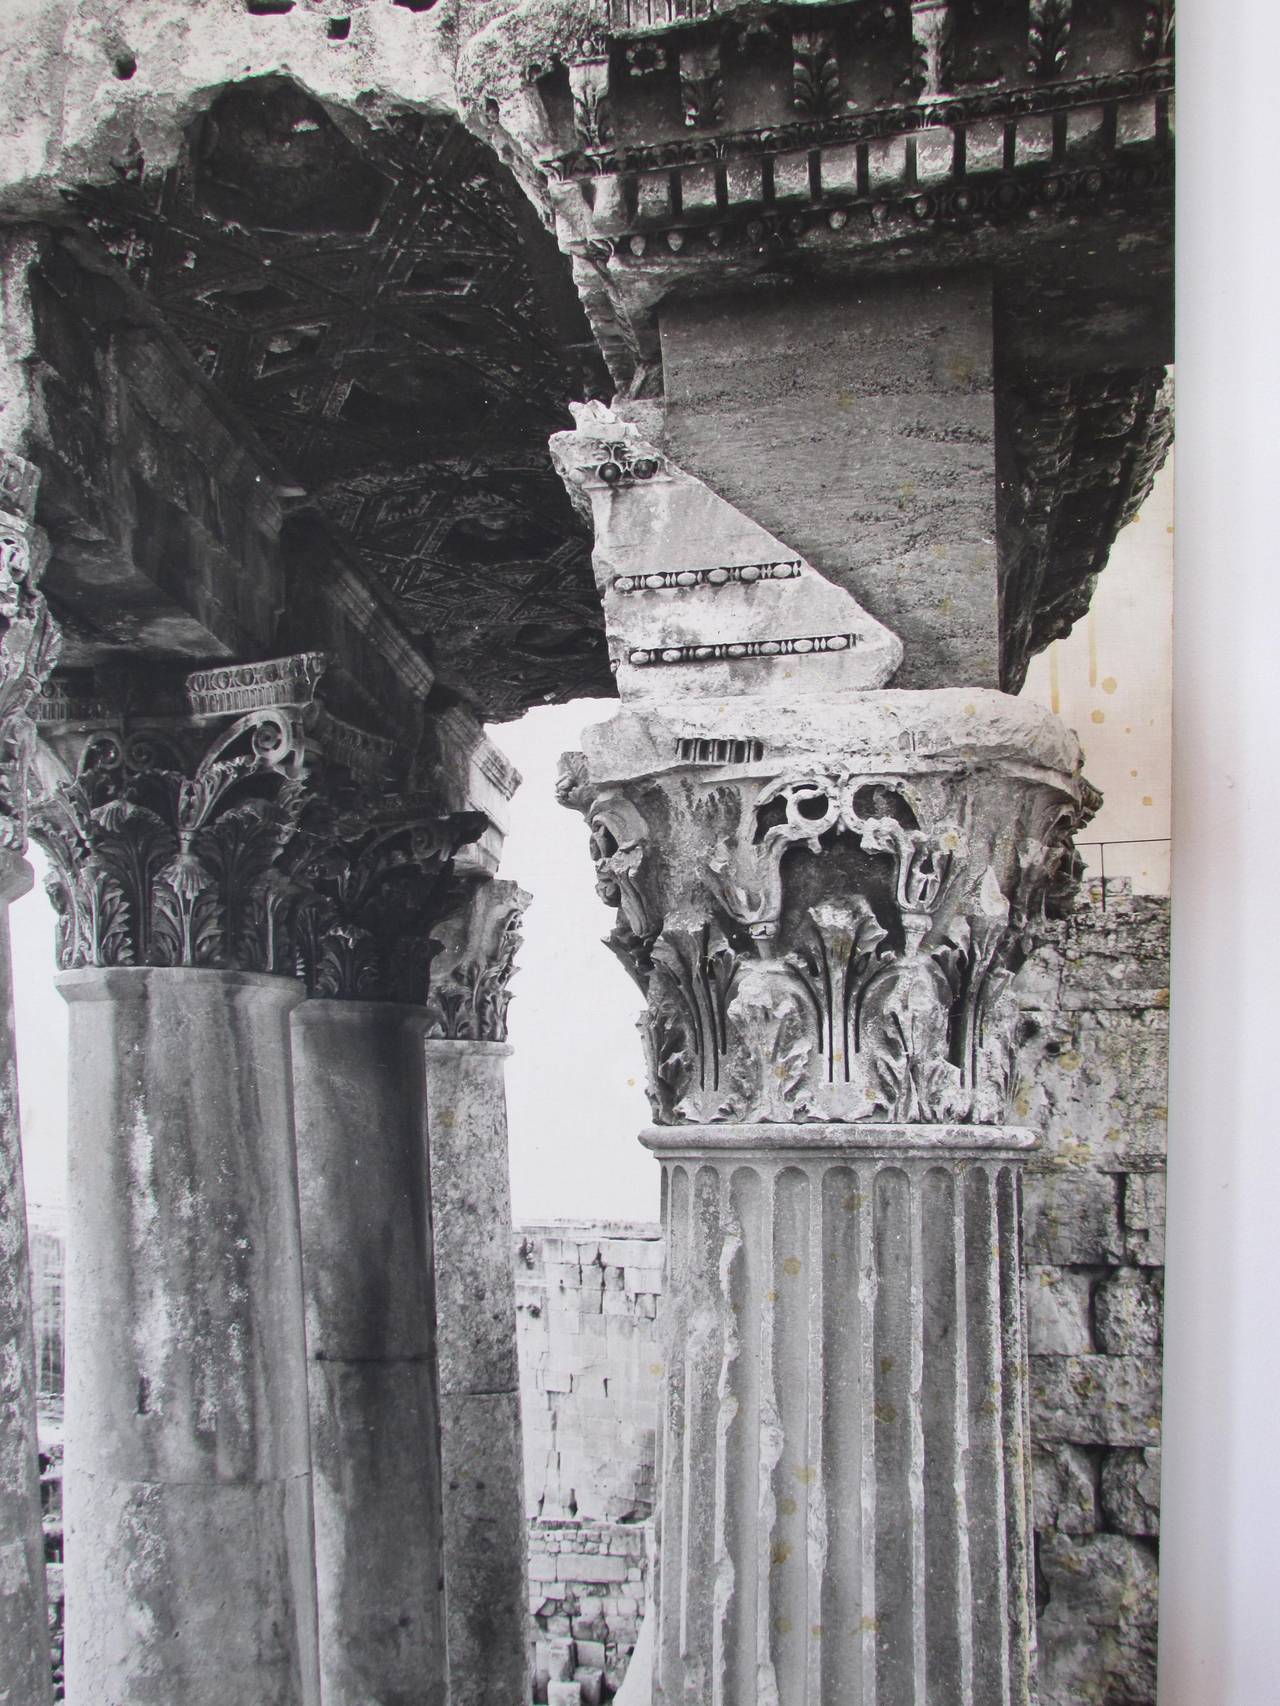 Large scale photo of Baalbek ruins from the Lebanon Pavilion at the 1964 Worlds Fair this is one of 30 panels (this one is numbered #19) that depicted famous archeological sites around Lebanon the sepia painted strip at bottom was inserted into a